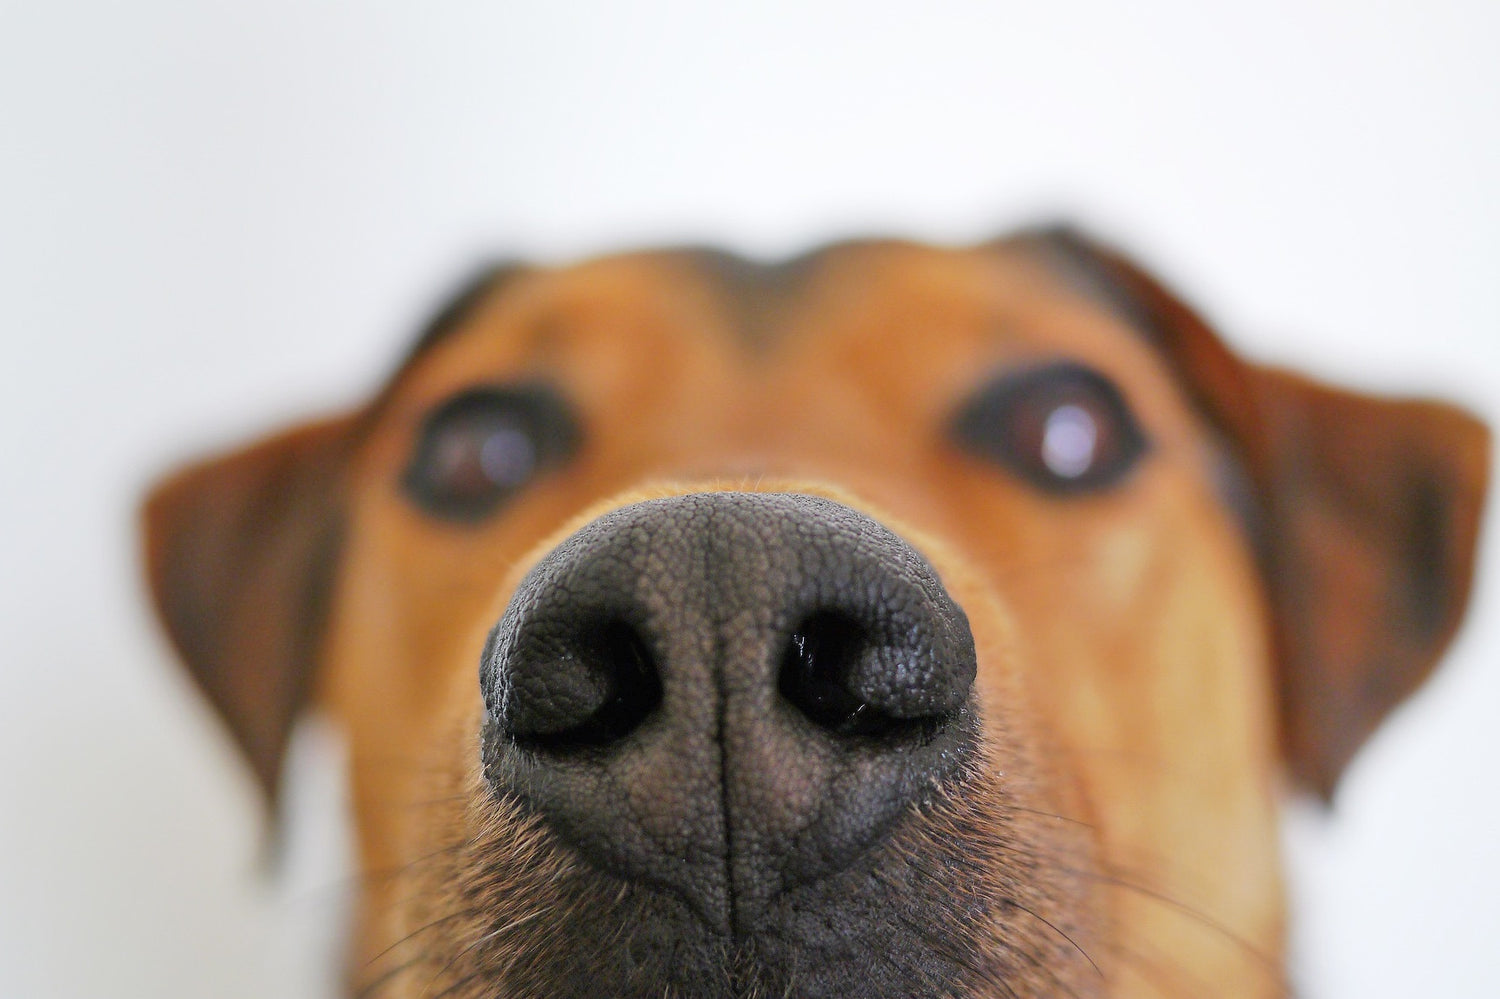 Dogs can detect cancer and tell time with their nose.